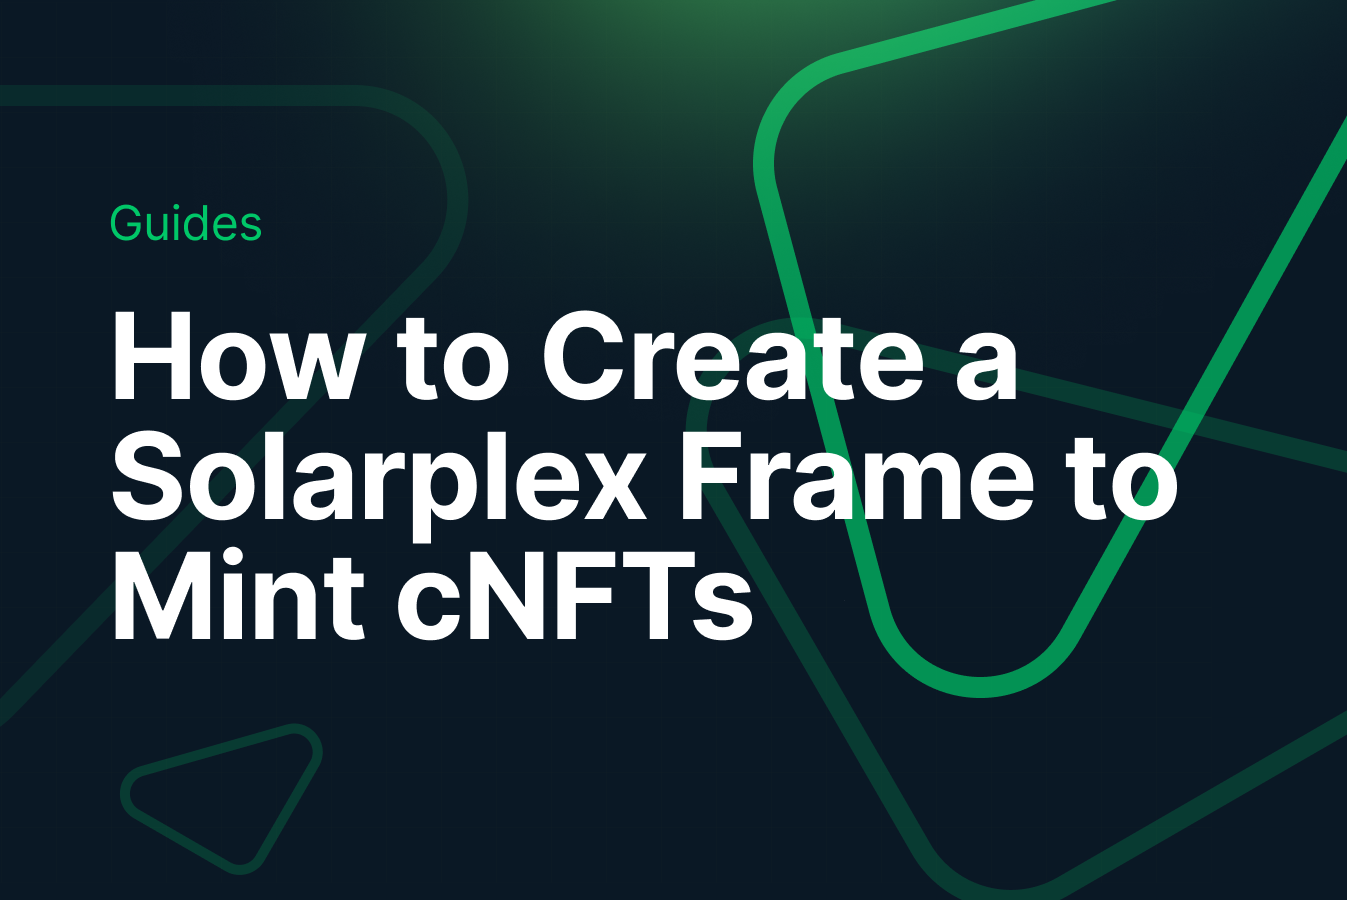 How to Create and Mint NFTs on Solana